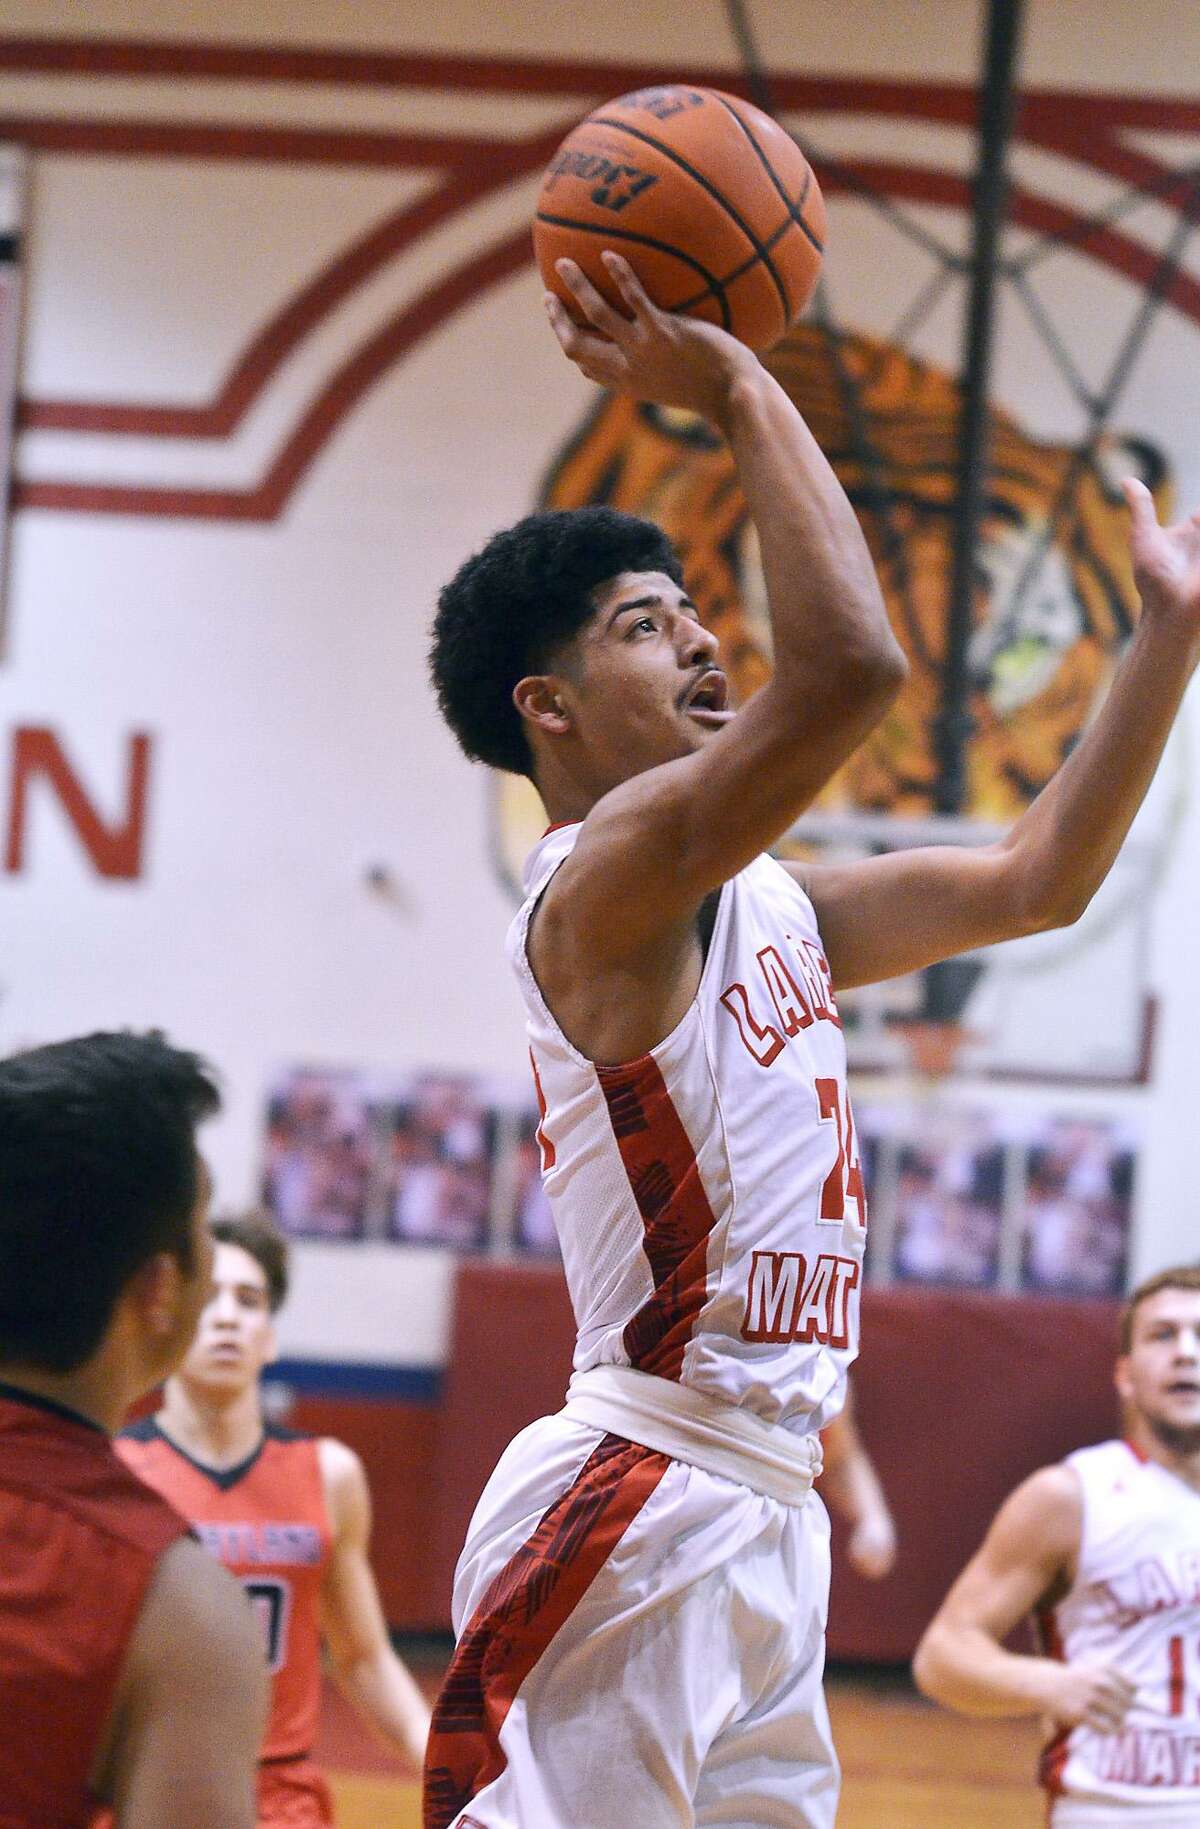 Martin’s Mathew Duron logged 11 points, nine rebounds and seven assists as the Tigers throttled Sharyland 67-38 on Tuesday.